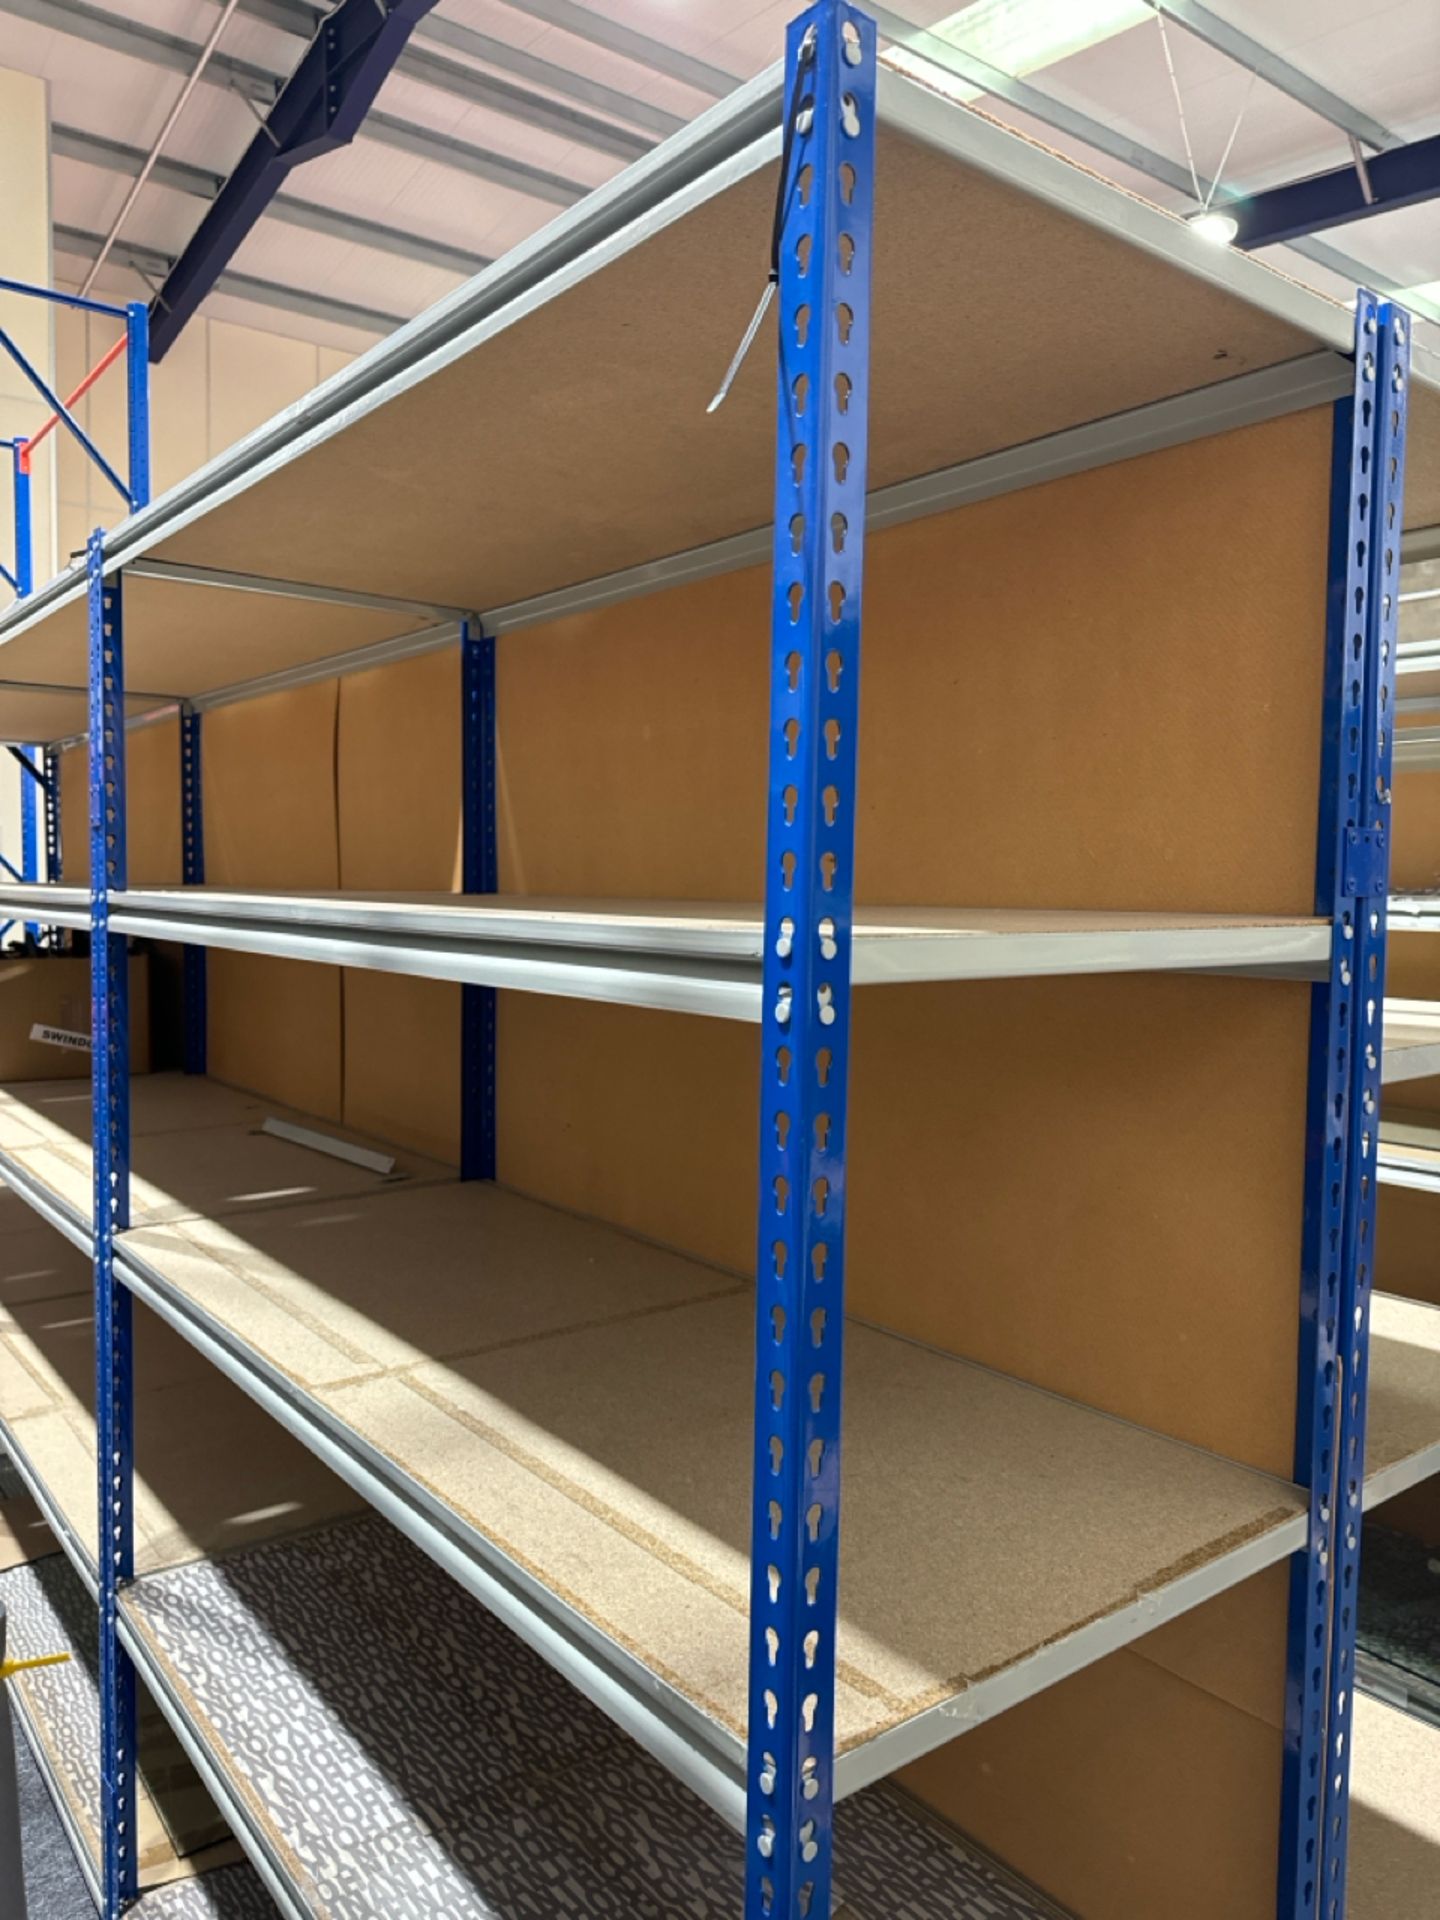 6 Bays Of Back To Back Boltless Racking - Image 5 of 5